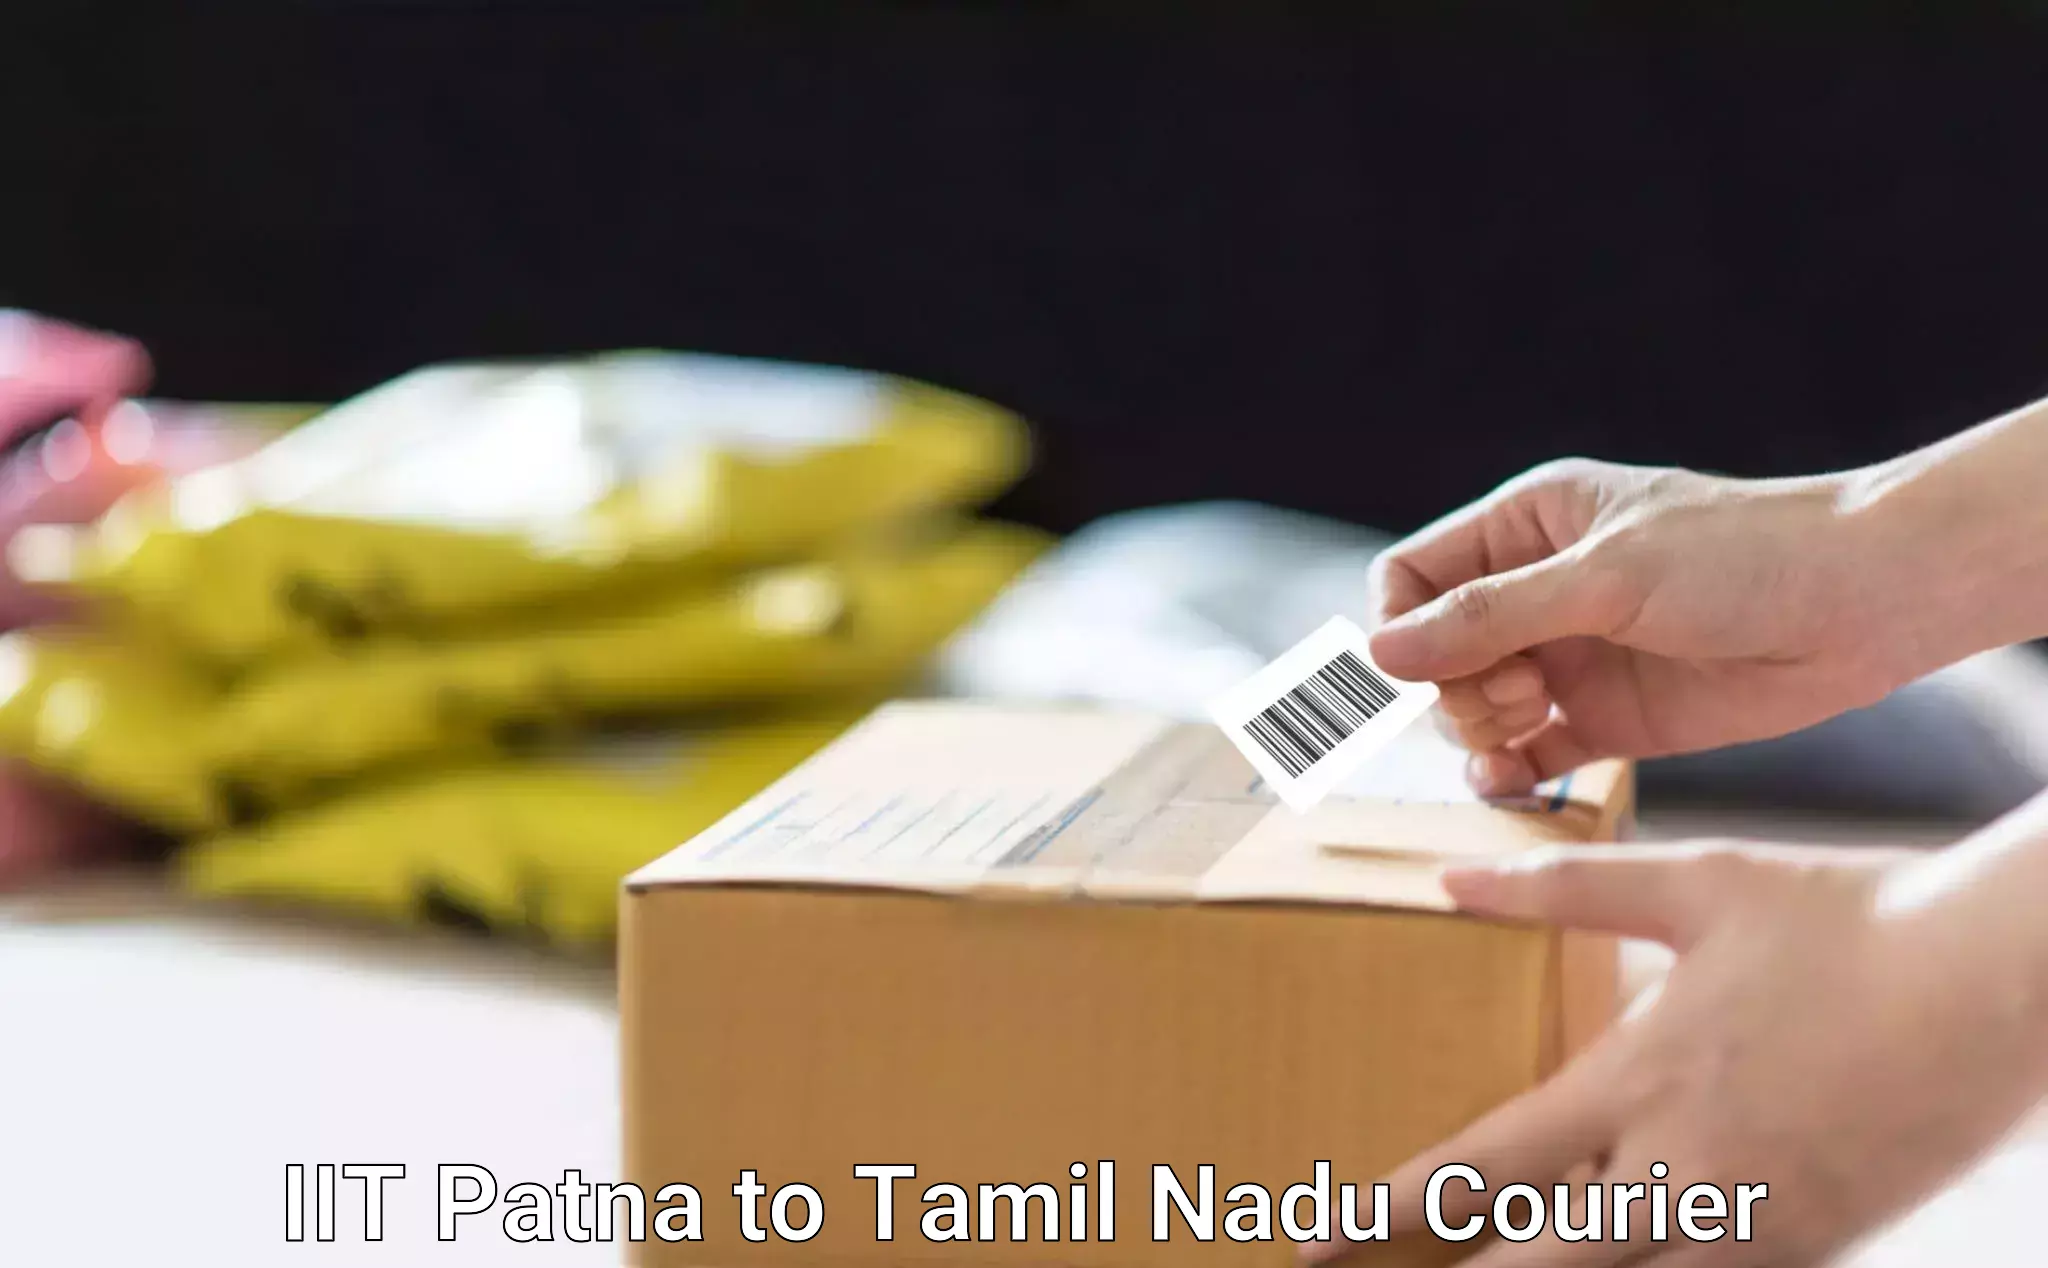 Efficient packing and moving IIT Patna to Tamil Nadu